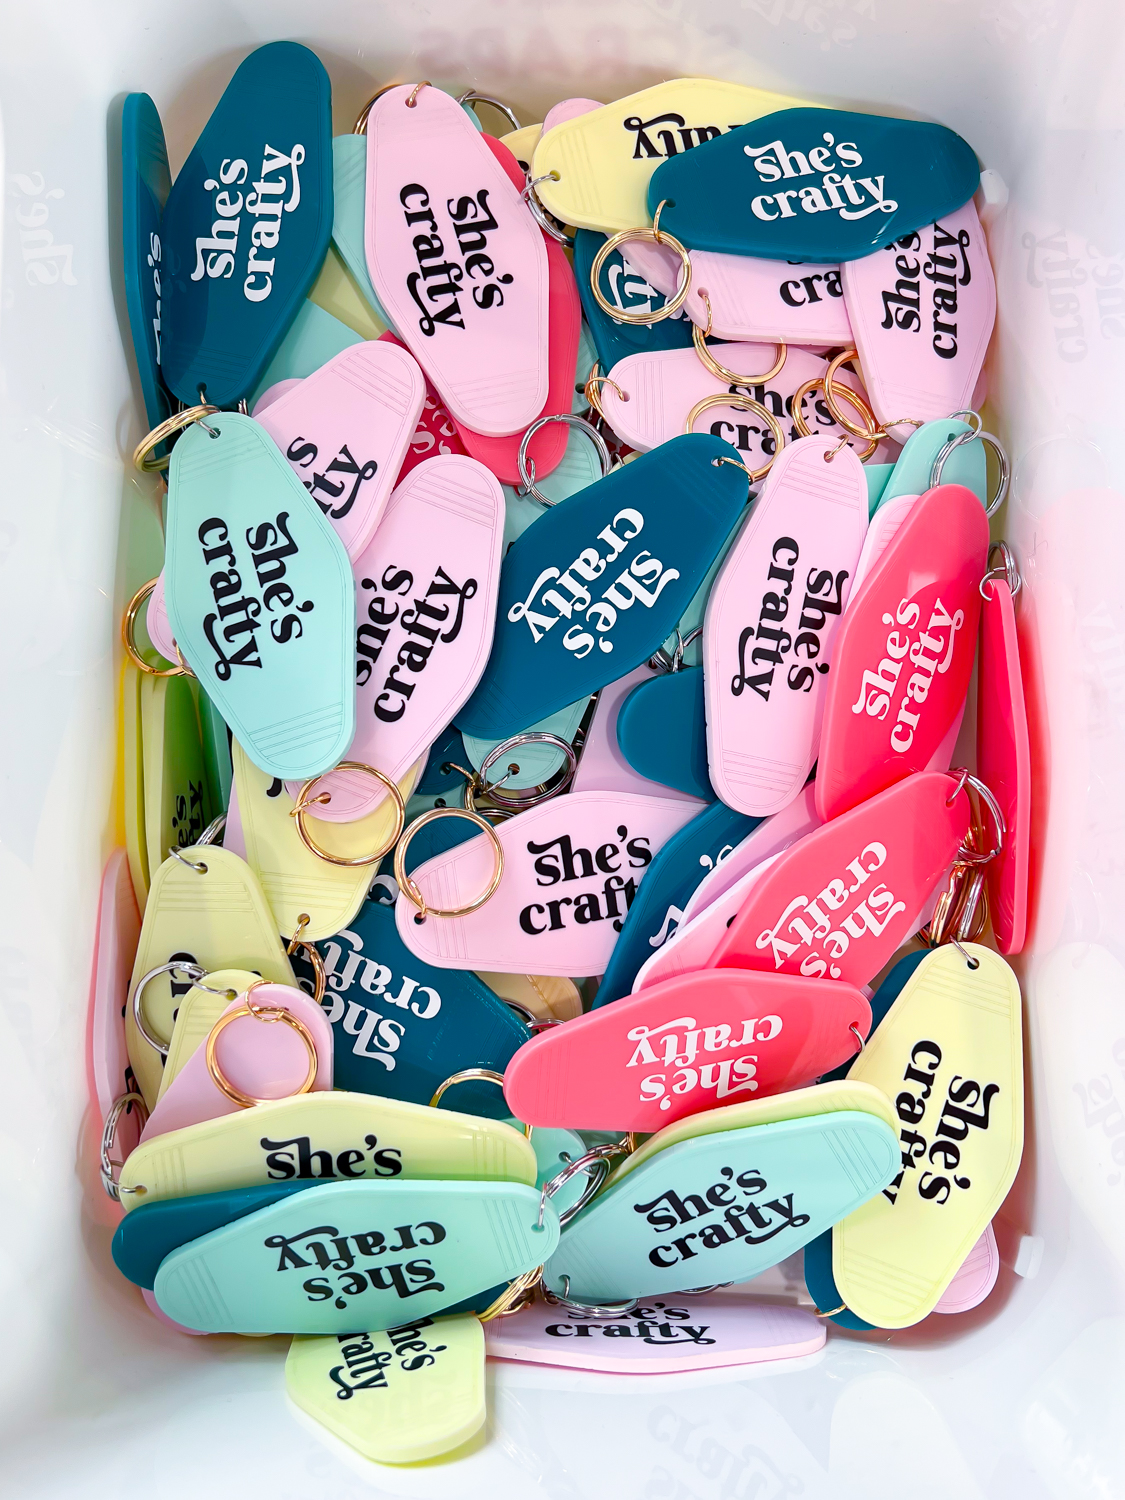 Box of colorful hotel keychains that say "she's crafty" in vinyl